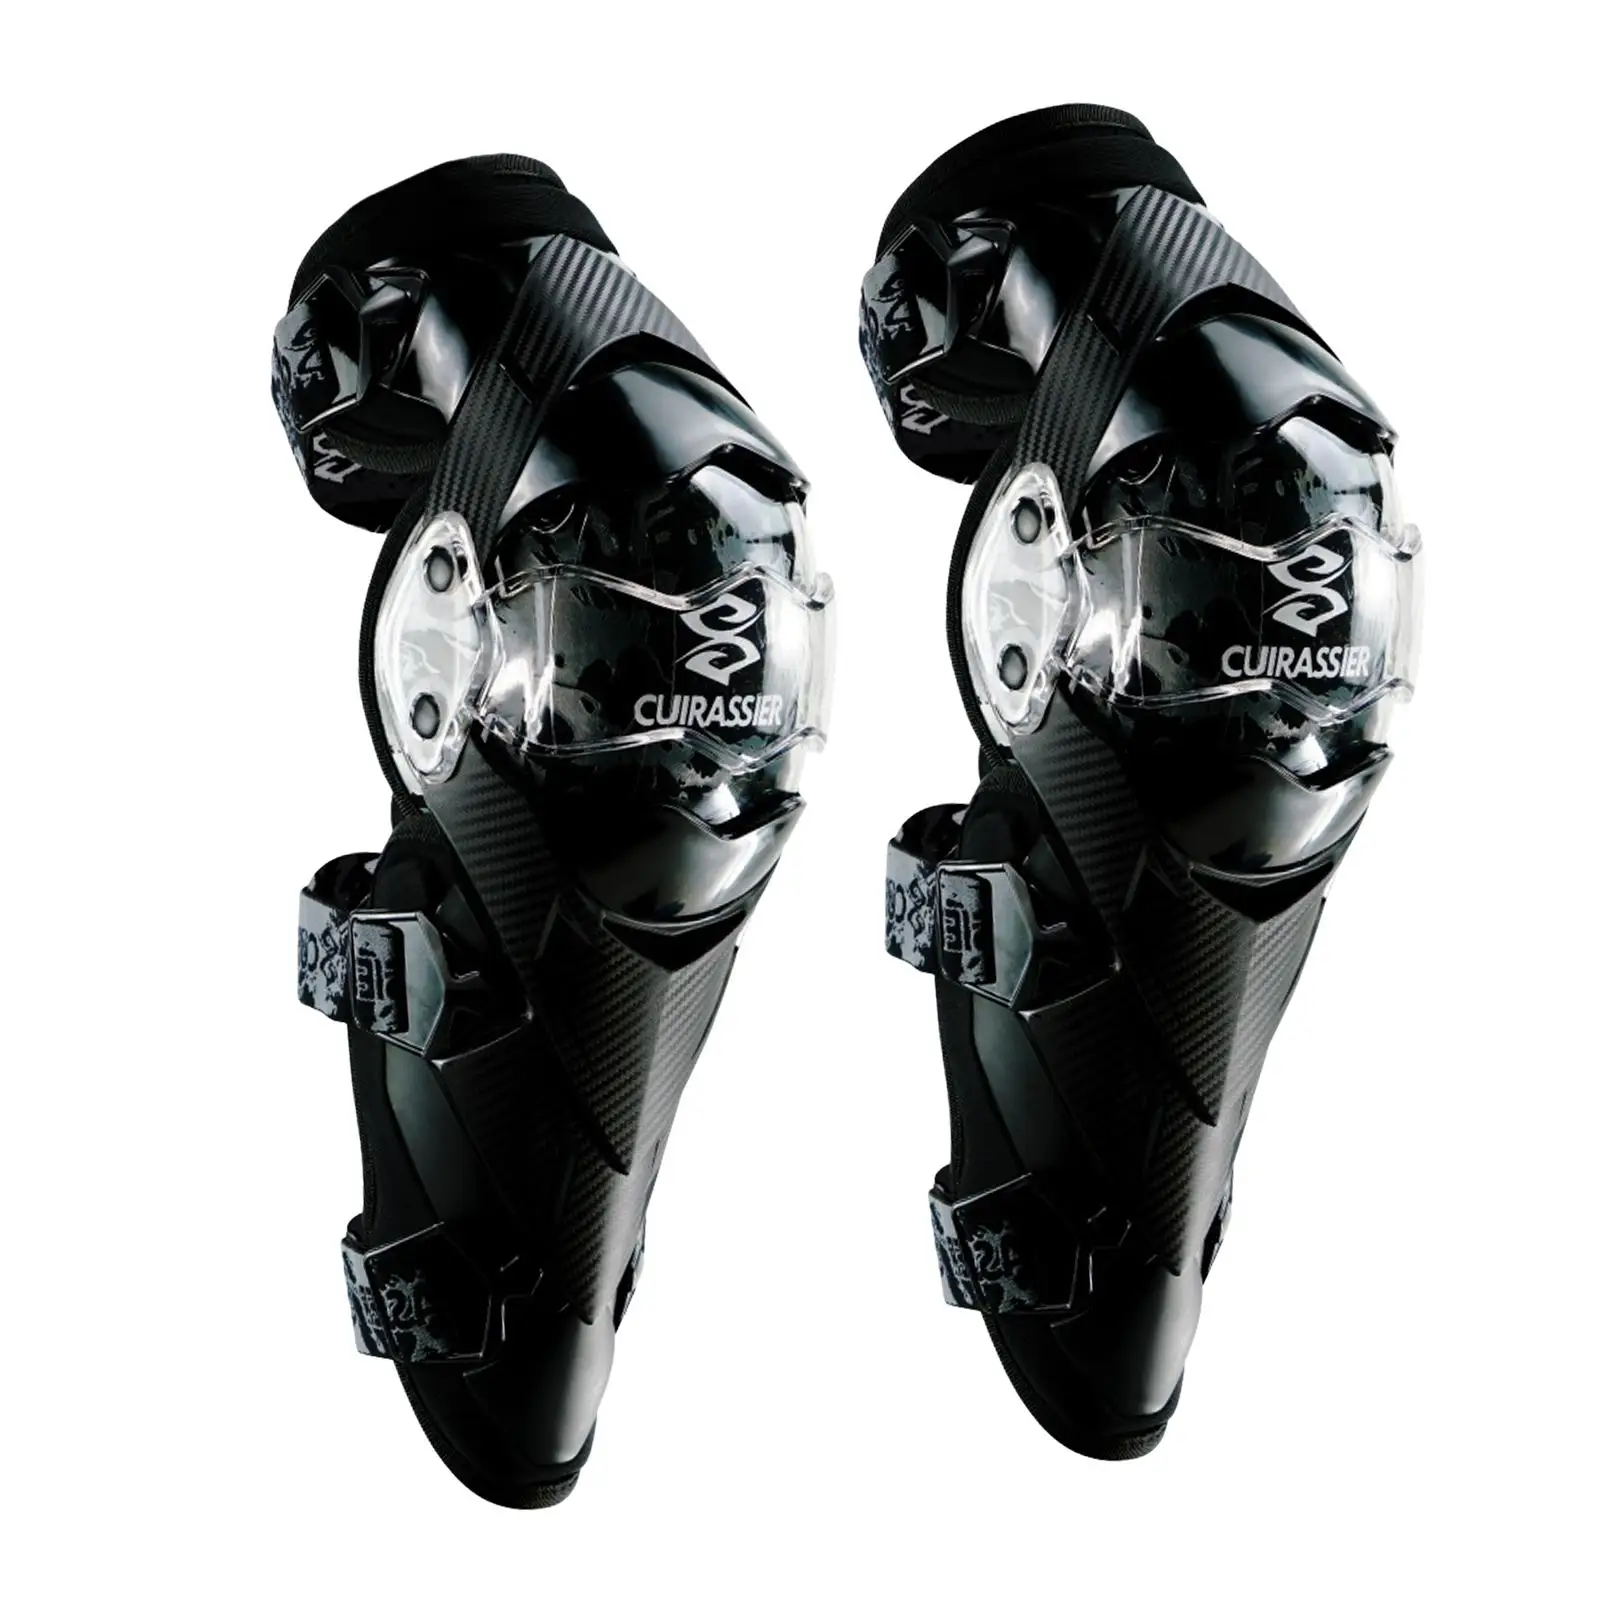 2pcs Knee Pads - Protective Elbow Guard/Knee and Shin Guards, Motorcycle Gear